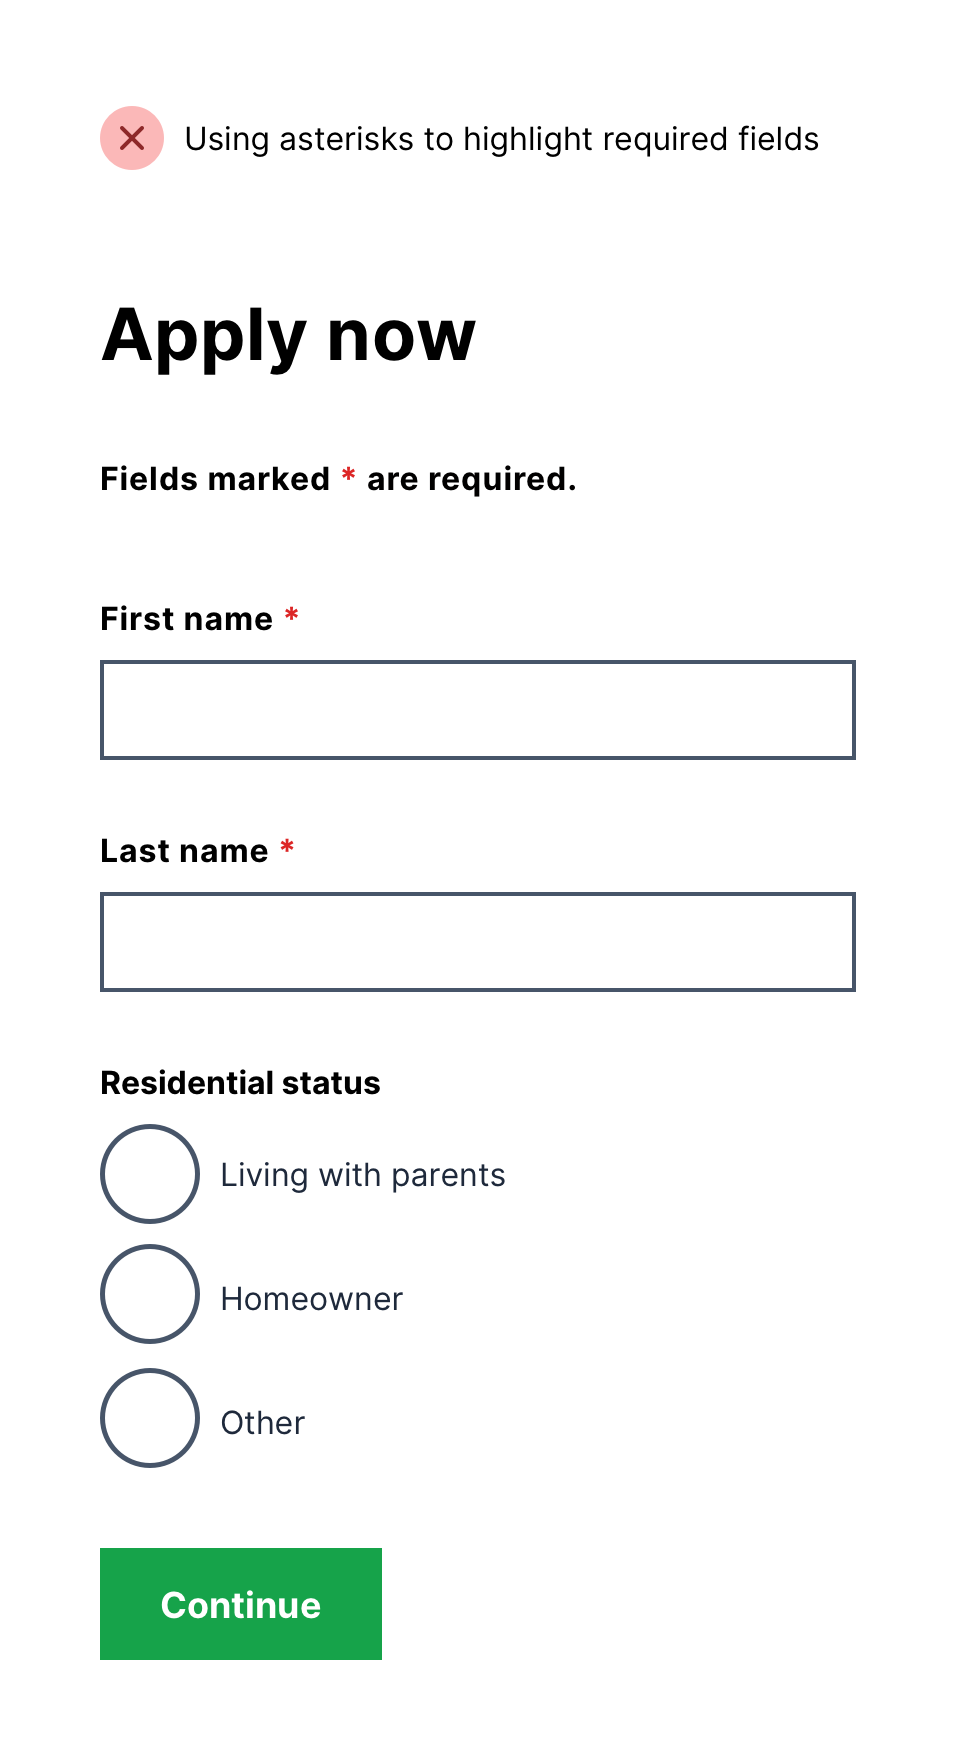 Required fields marked with a red asterisk